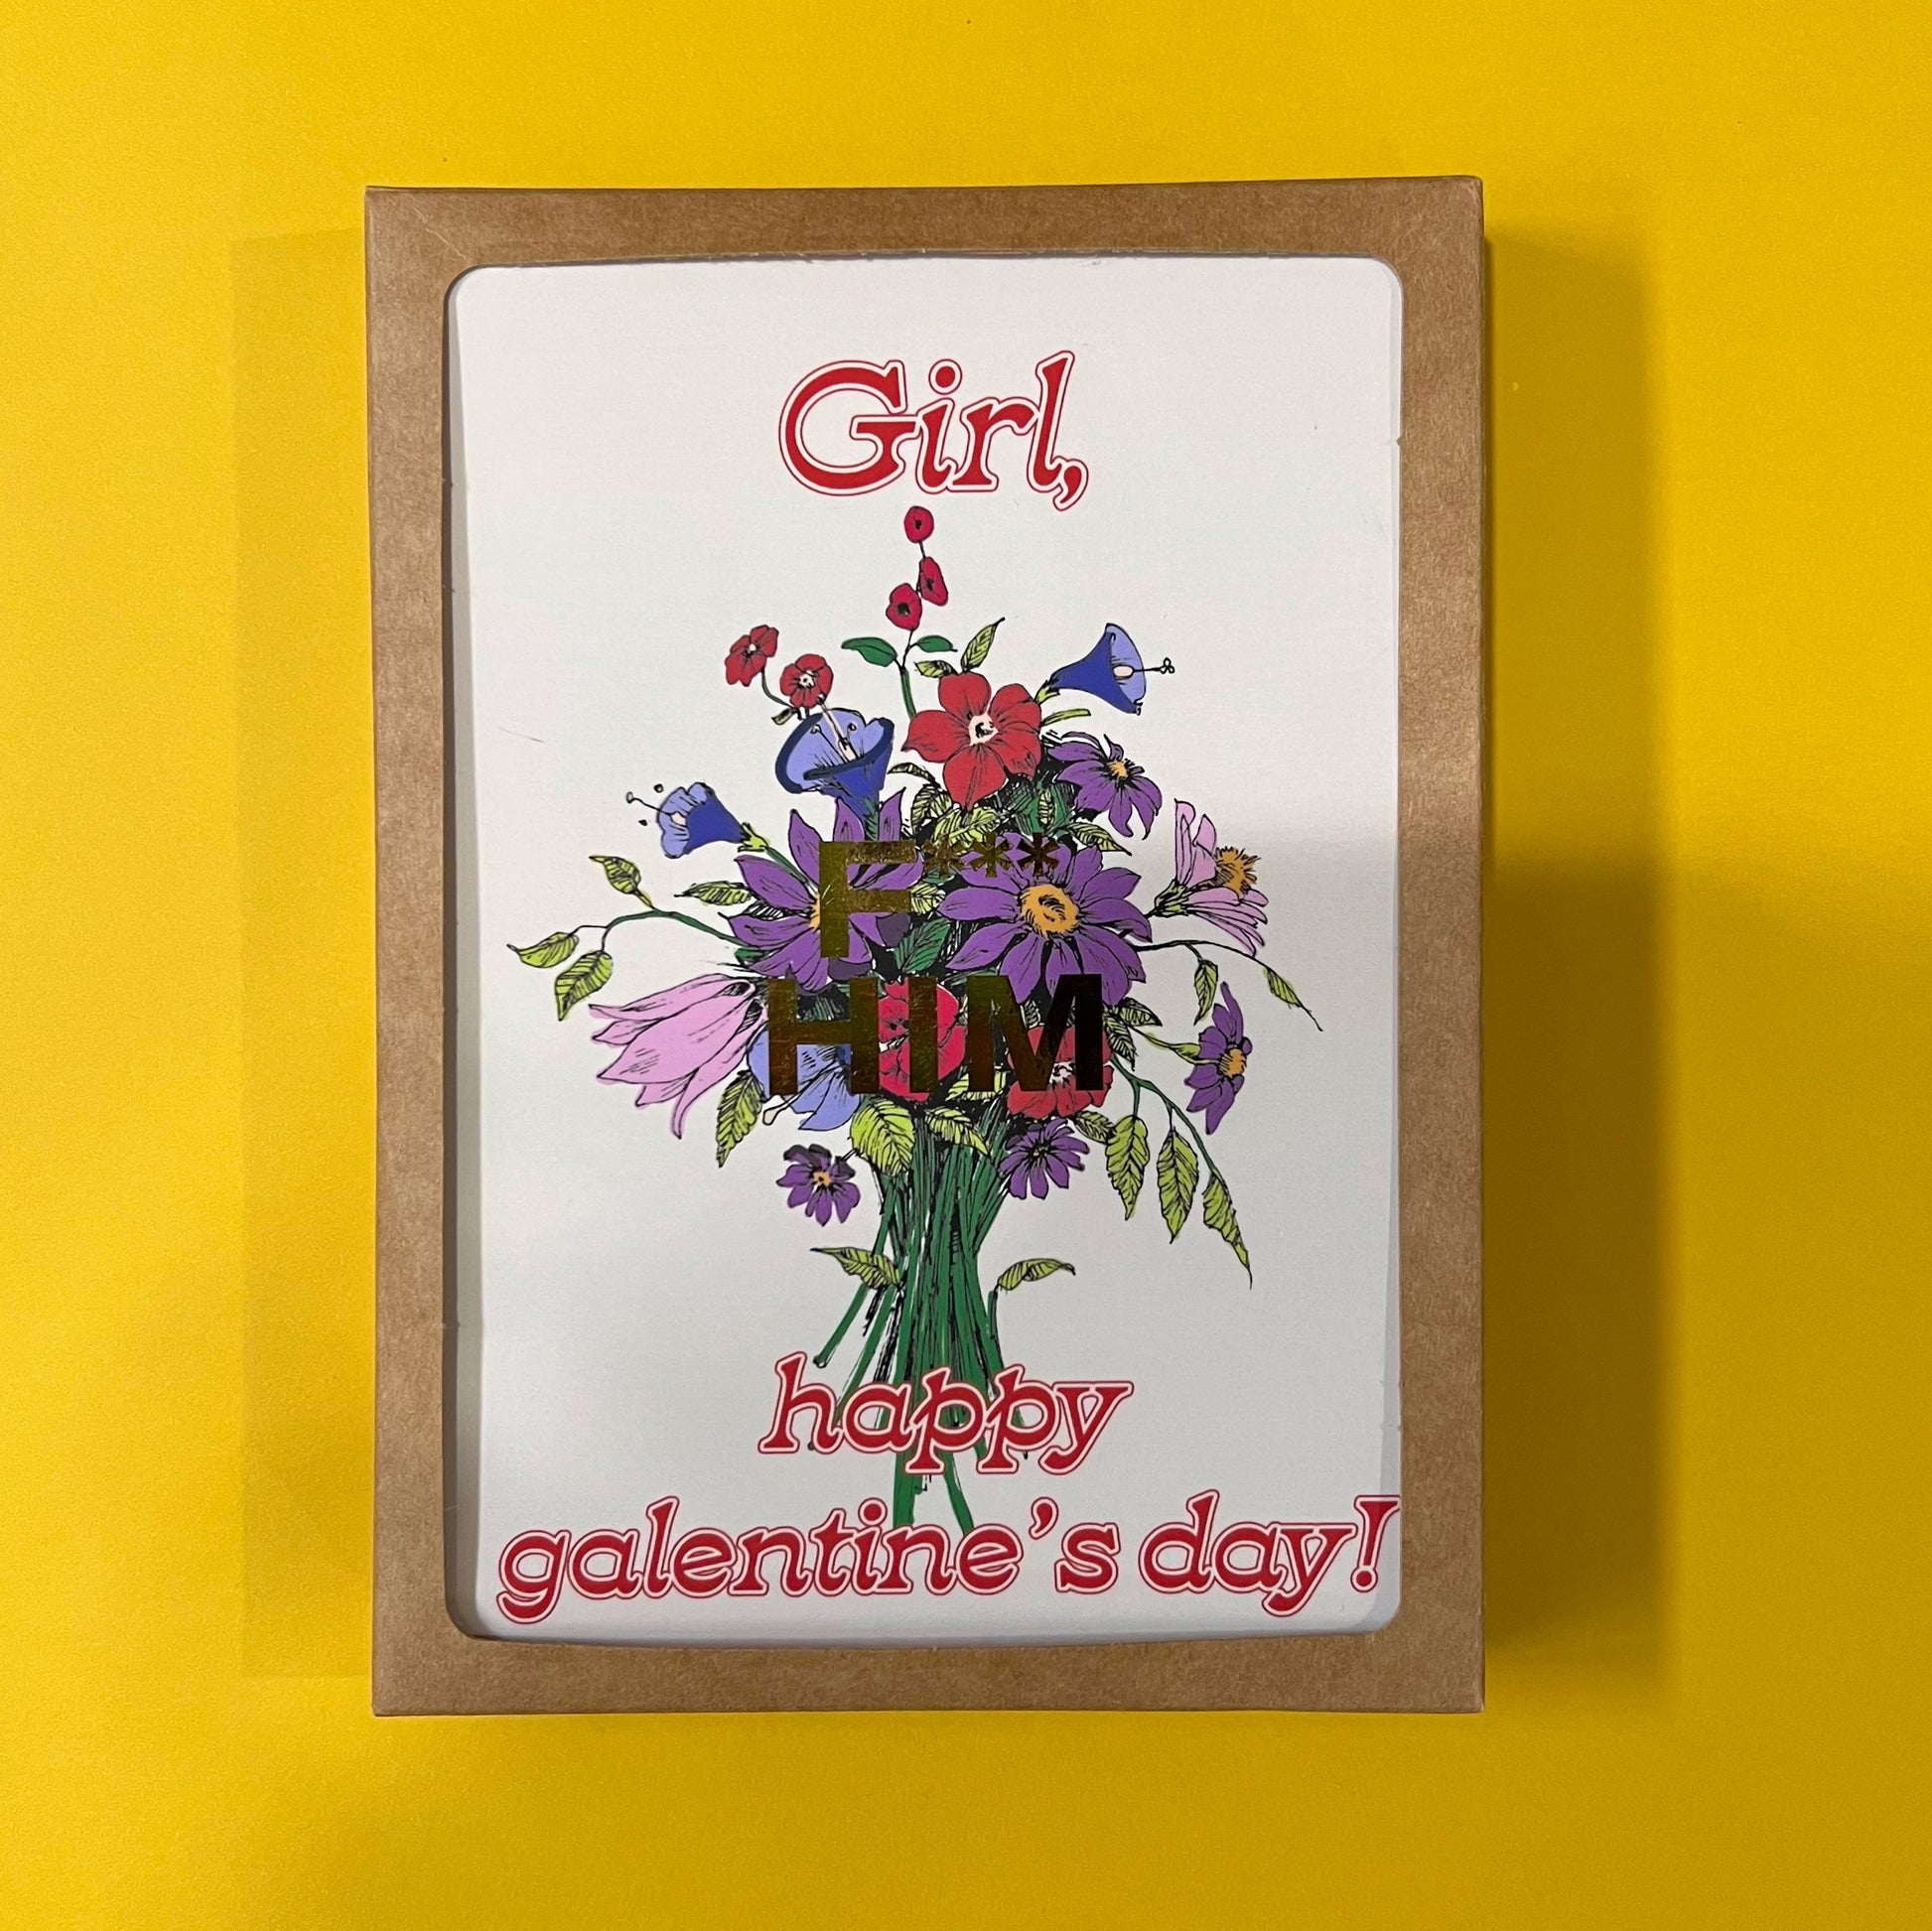 Girl F Him 5x7” Gold Foil Breakup Galentines Day Love Valentines Day greeting card from Goods Made By Digitrillnana, Ashley Fletcher. Perfect card for a friend on valentines day! Black Woman Owned.